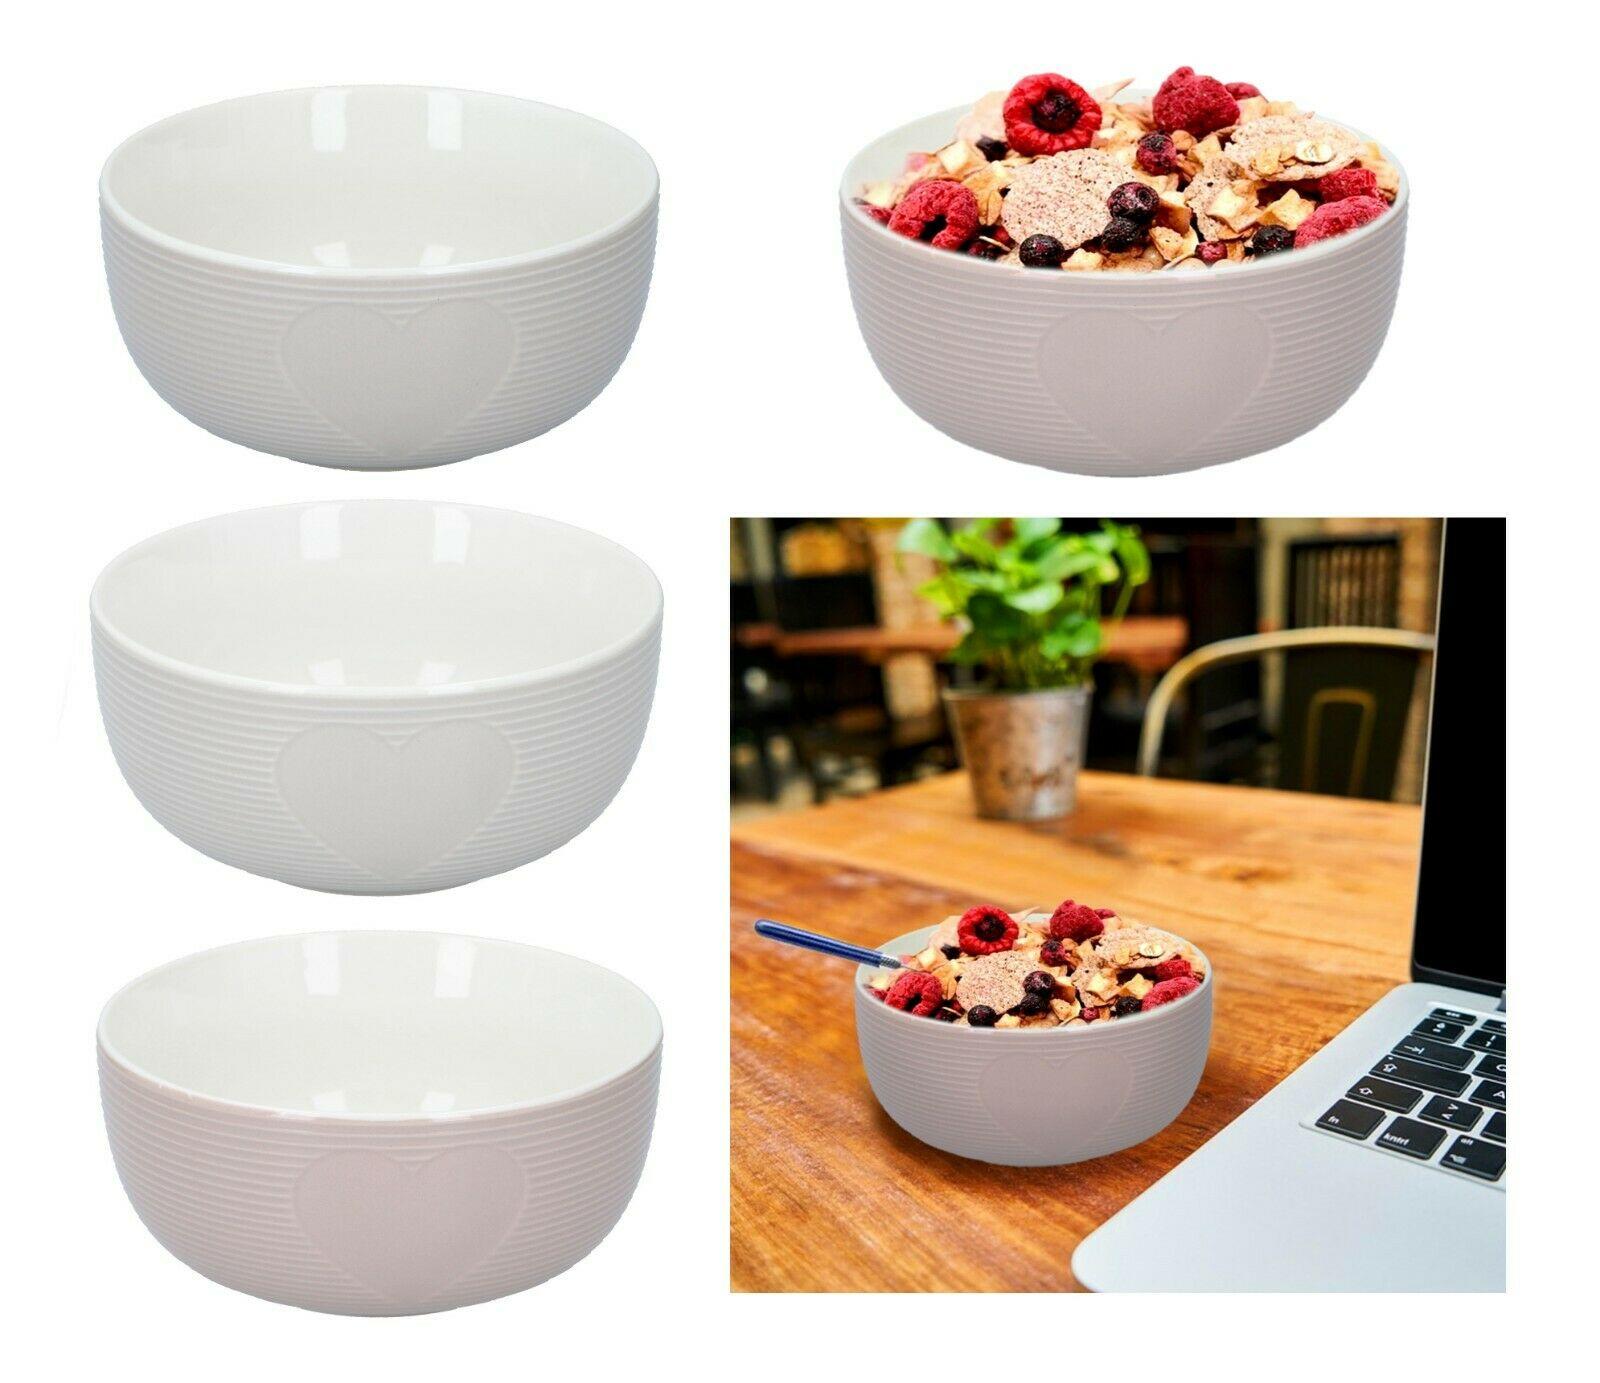 Cereal Bowls 4-Piece Round Breakfast Cereal Oatmeal Bowls Woven Pattern  Colours